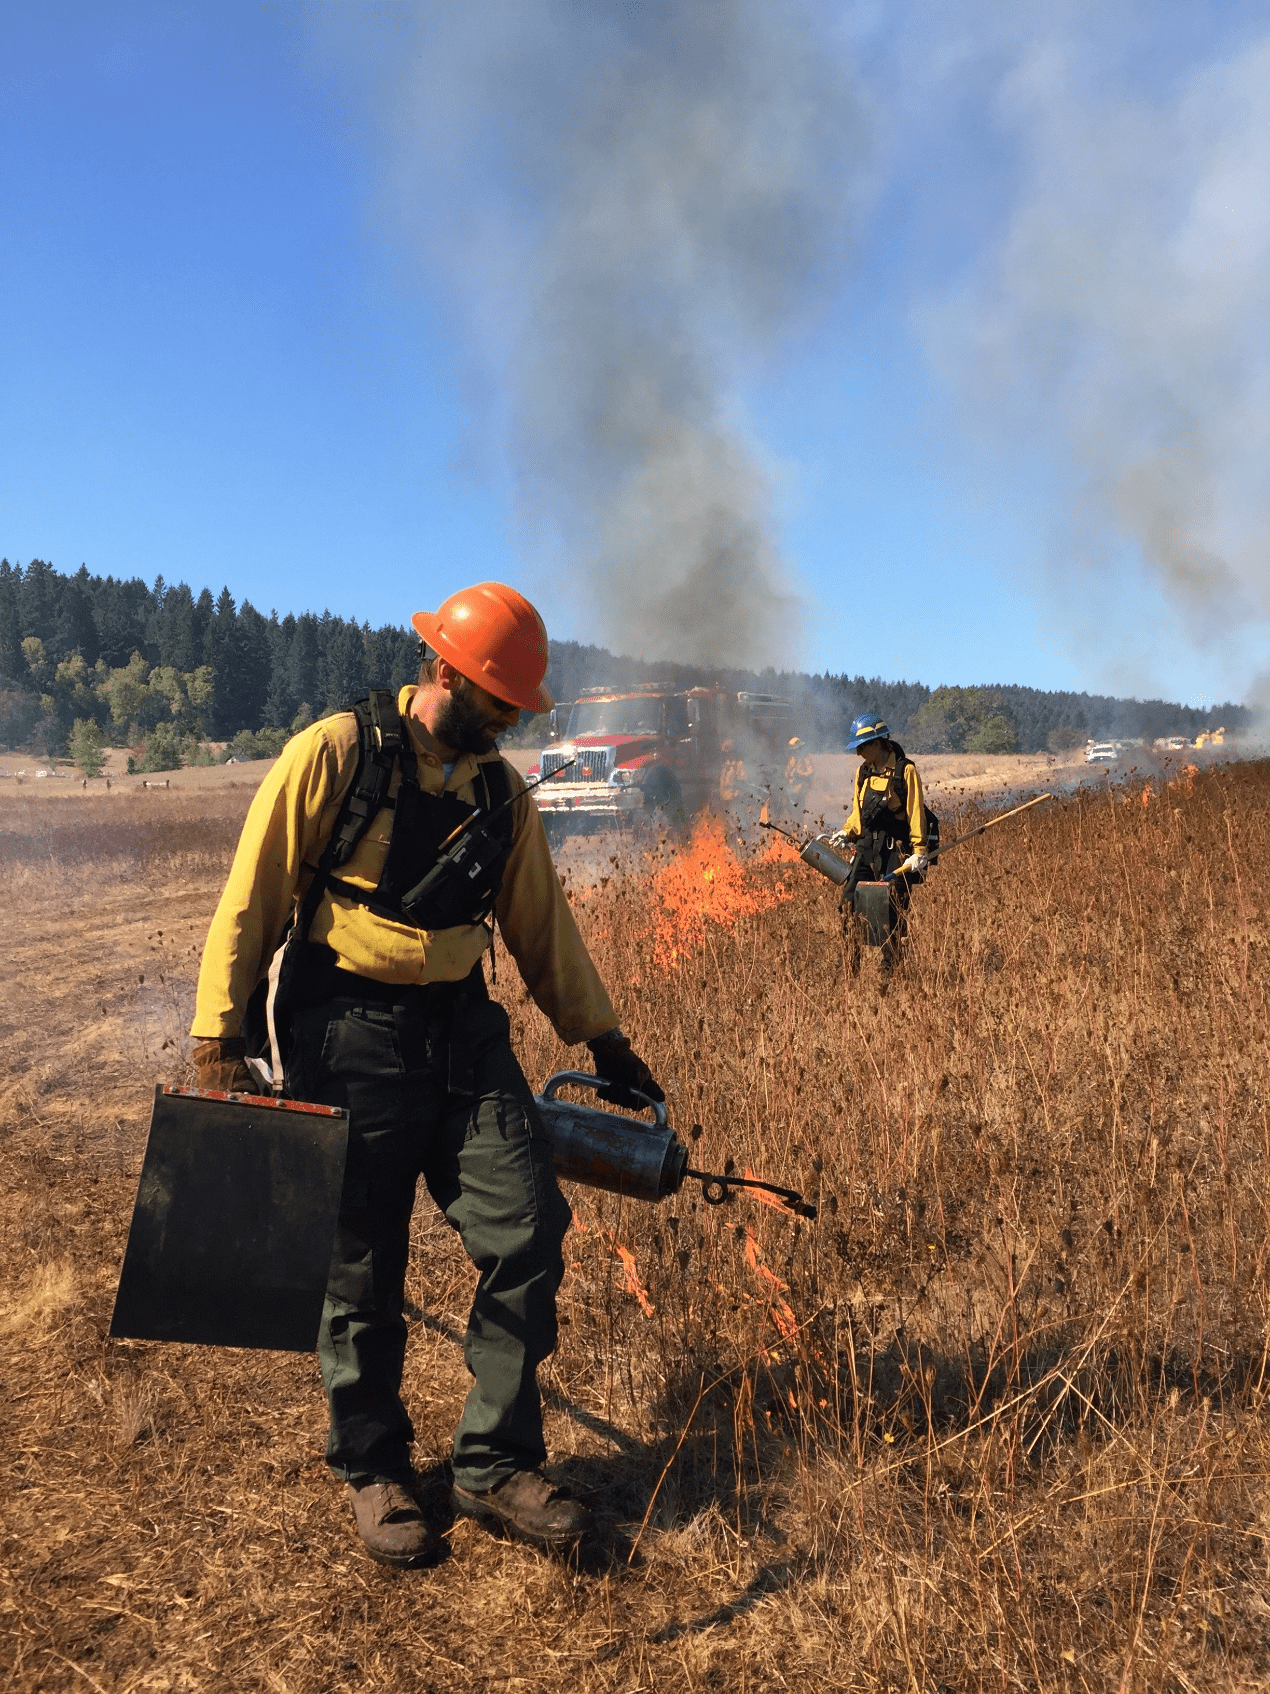 An ignition crew uses drip torches to ignite a prescribed fire.